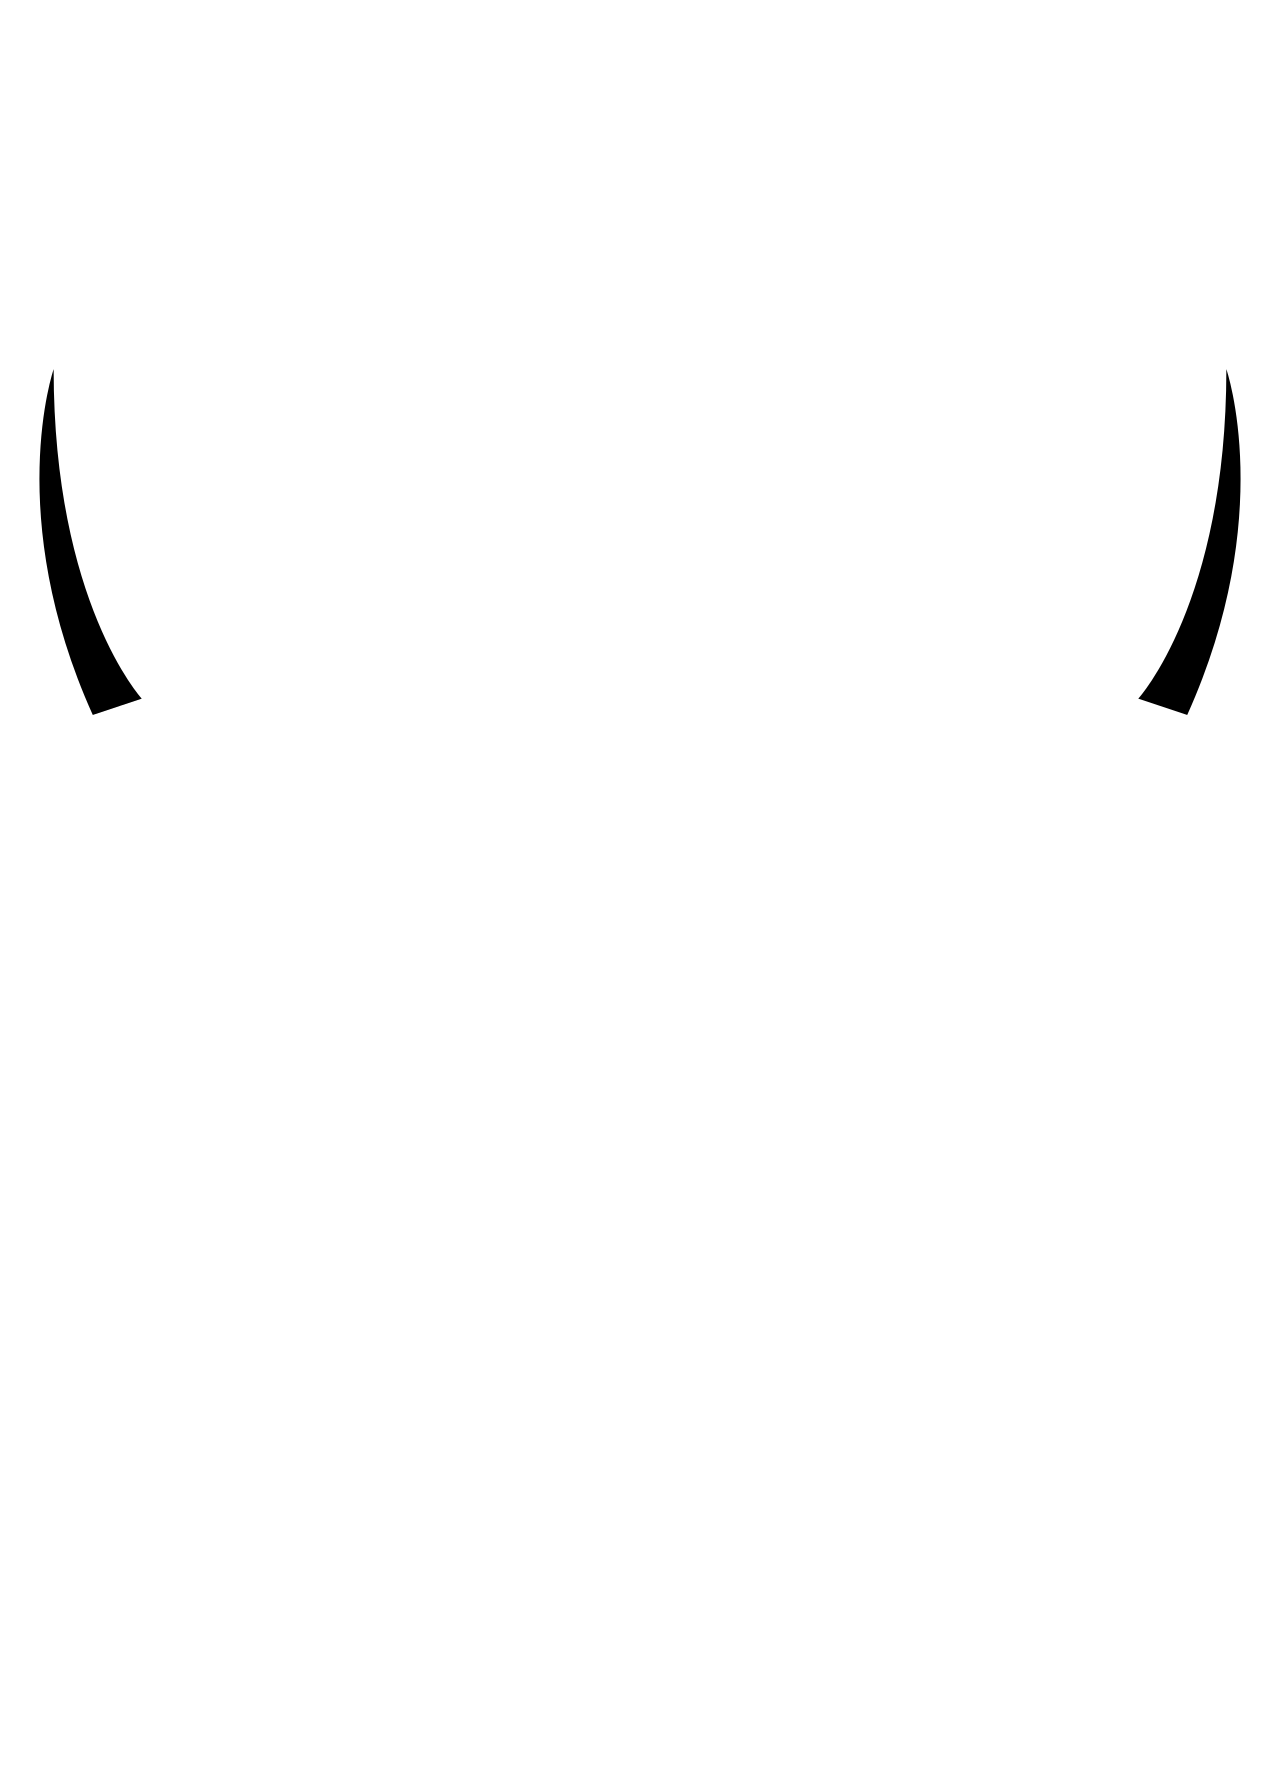 BULL's web page